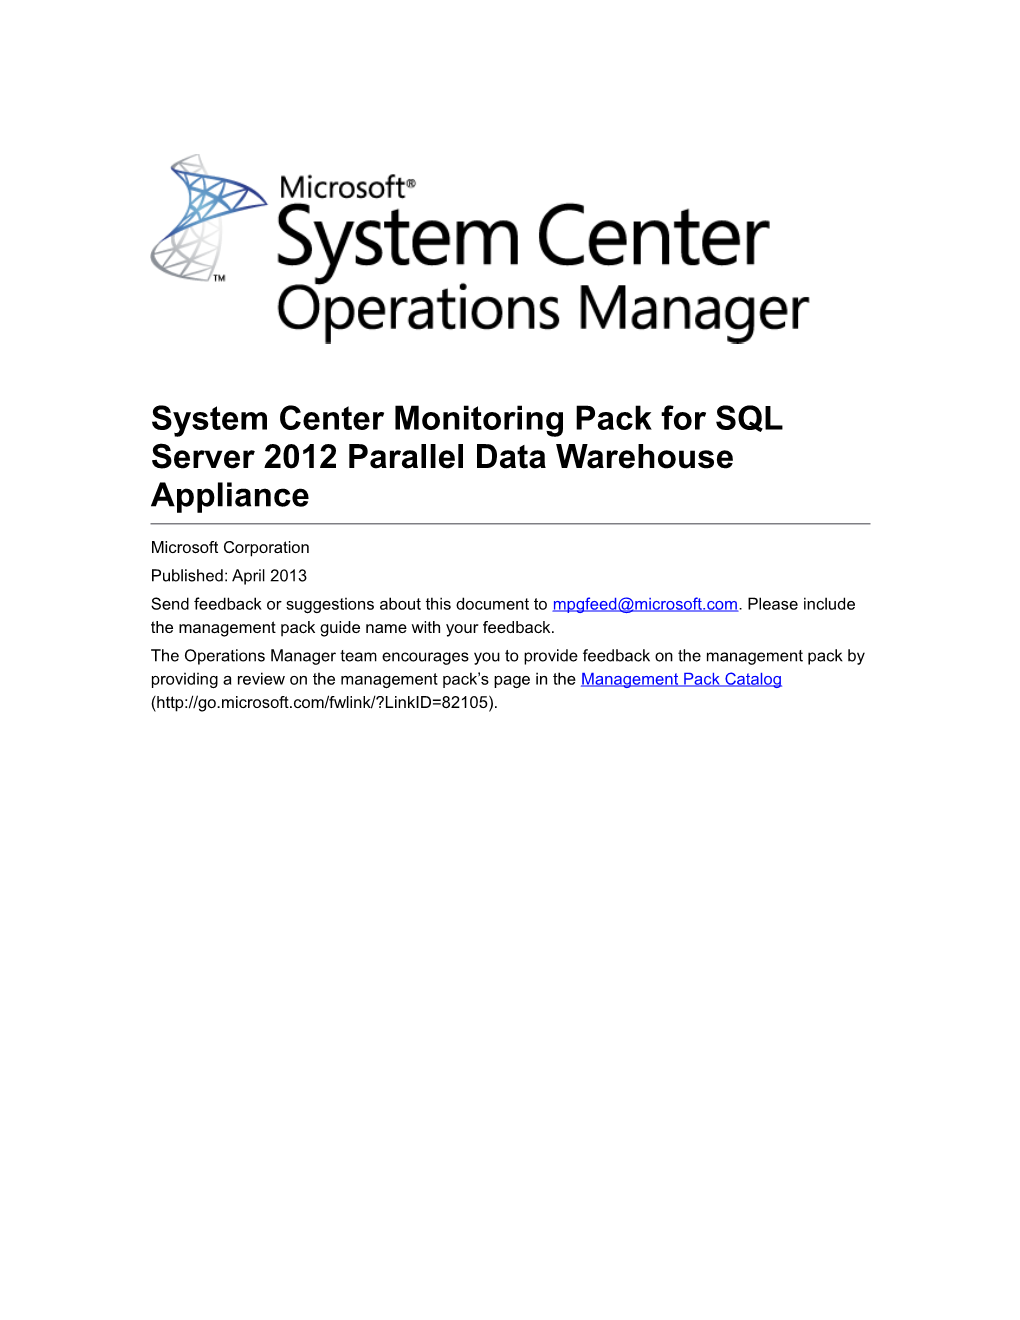 PDW Management Pack Operations Guide